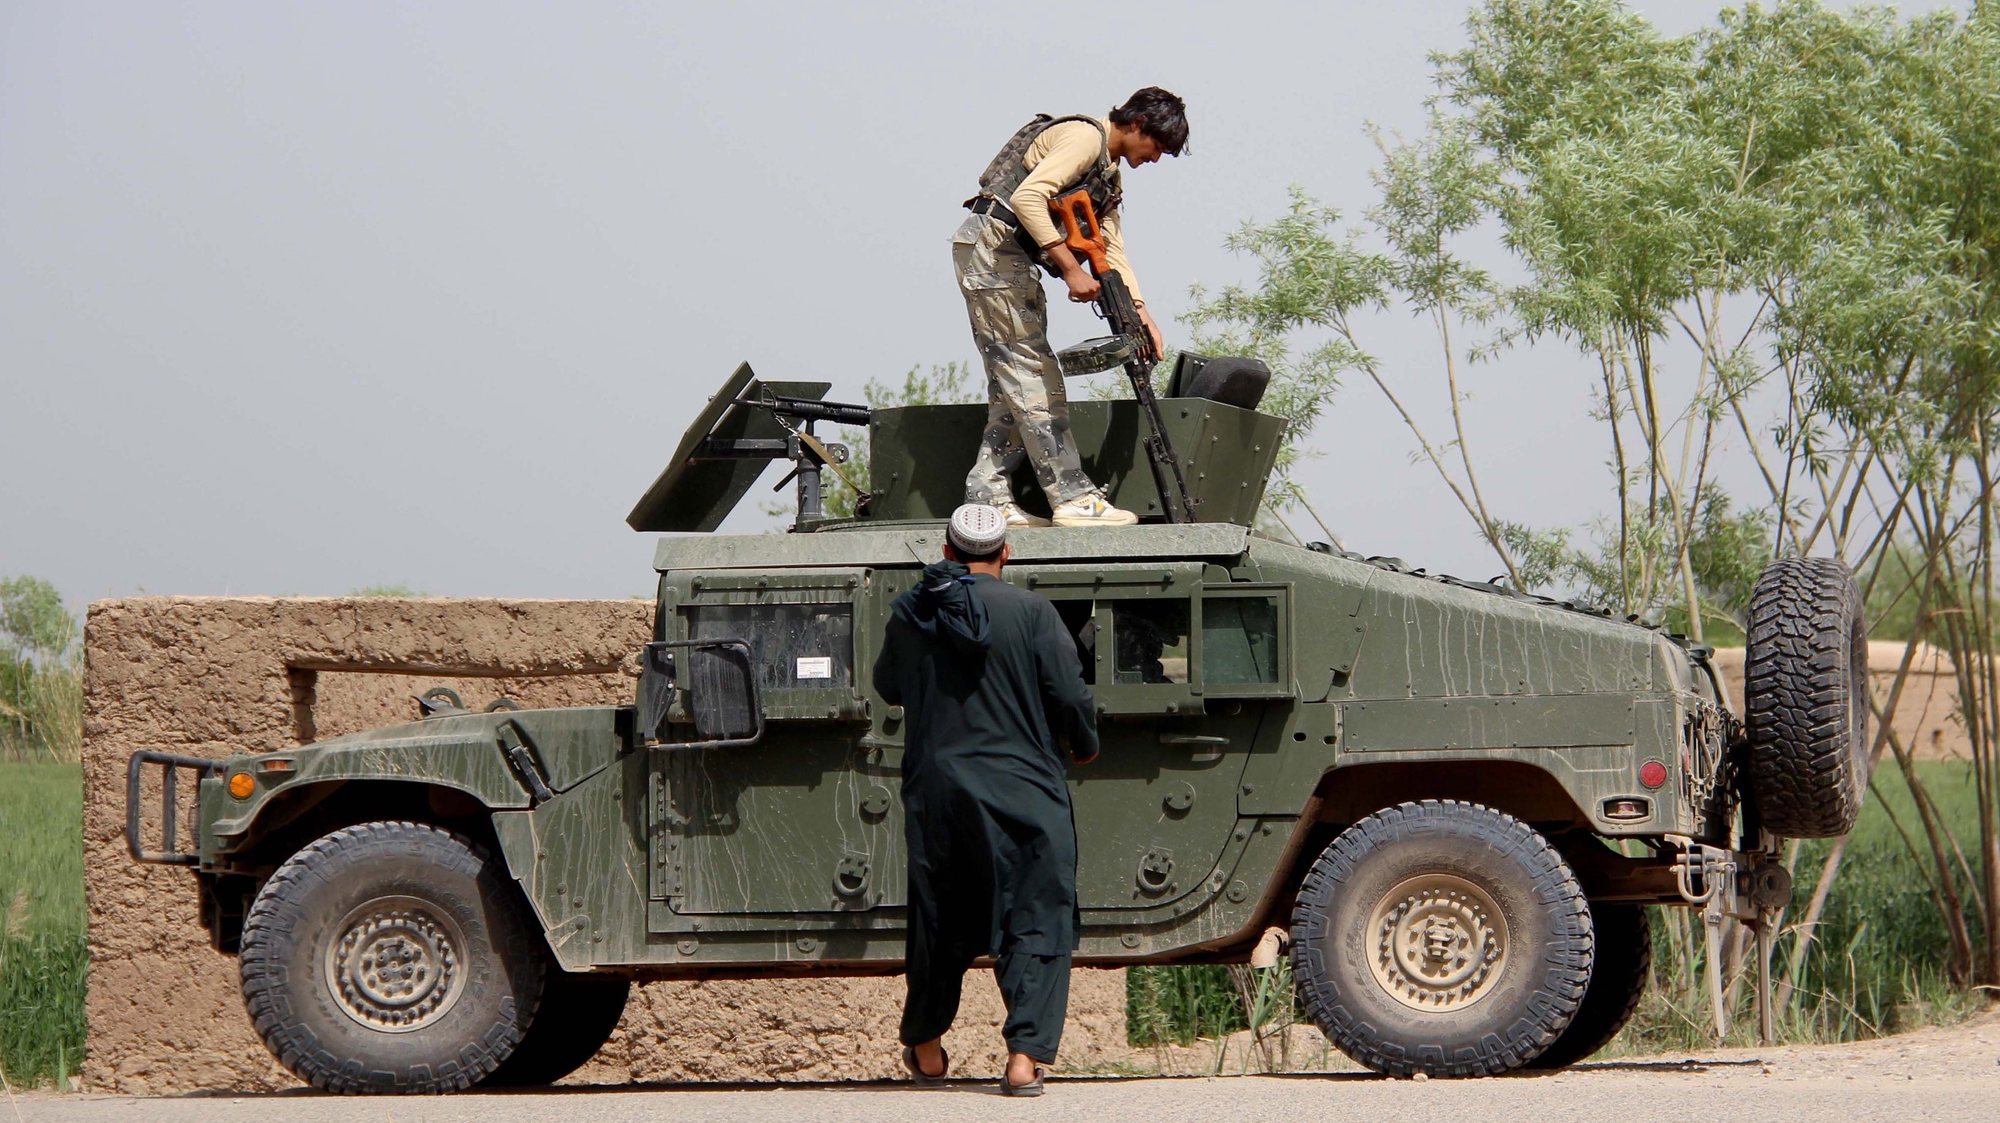 epa07491925 Afghan security forces patrol in Helmand, Afghanistan, 08 April 2019. According to reports, at least 99 Taliban fighters and 12 government security personnel have been killed in a fierce and lengthy battle in Afghanistanâ€™s western province of Badghis. The militant attack and the governmentâ€™s counter-offensive came as officials from the United States and the Taliban have held several rounds of talks in recent months in the United Arab Emirates and Qatar to end the 18-year war in Afghanistan.  EPA/WATAN YAR